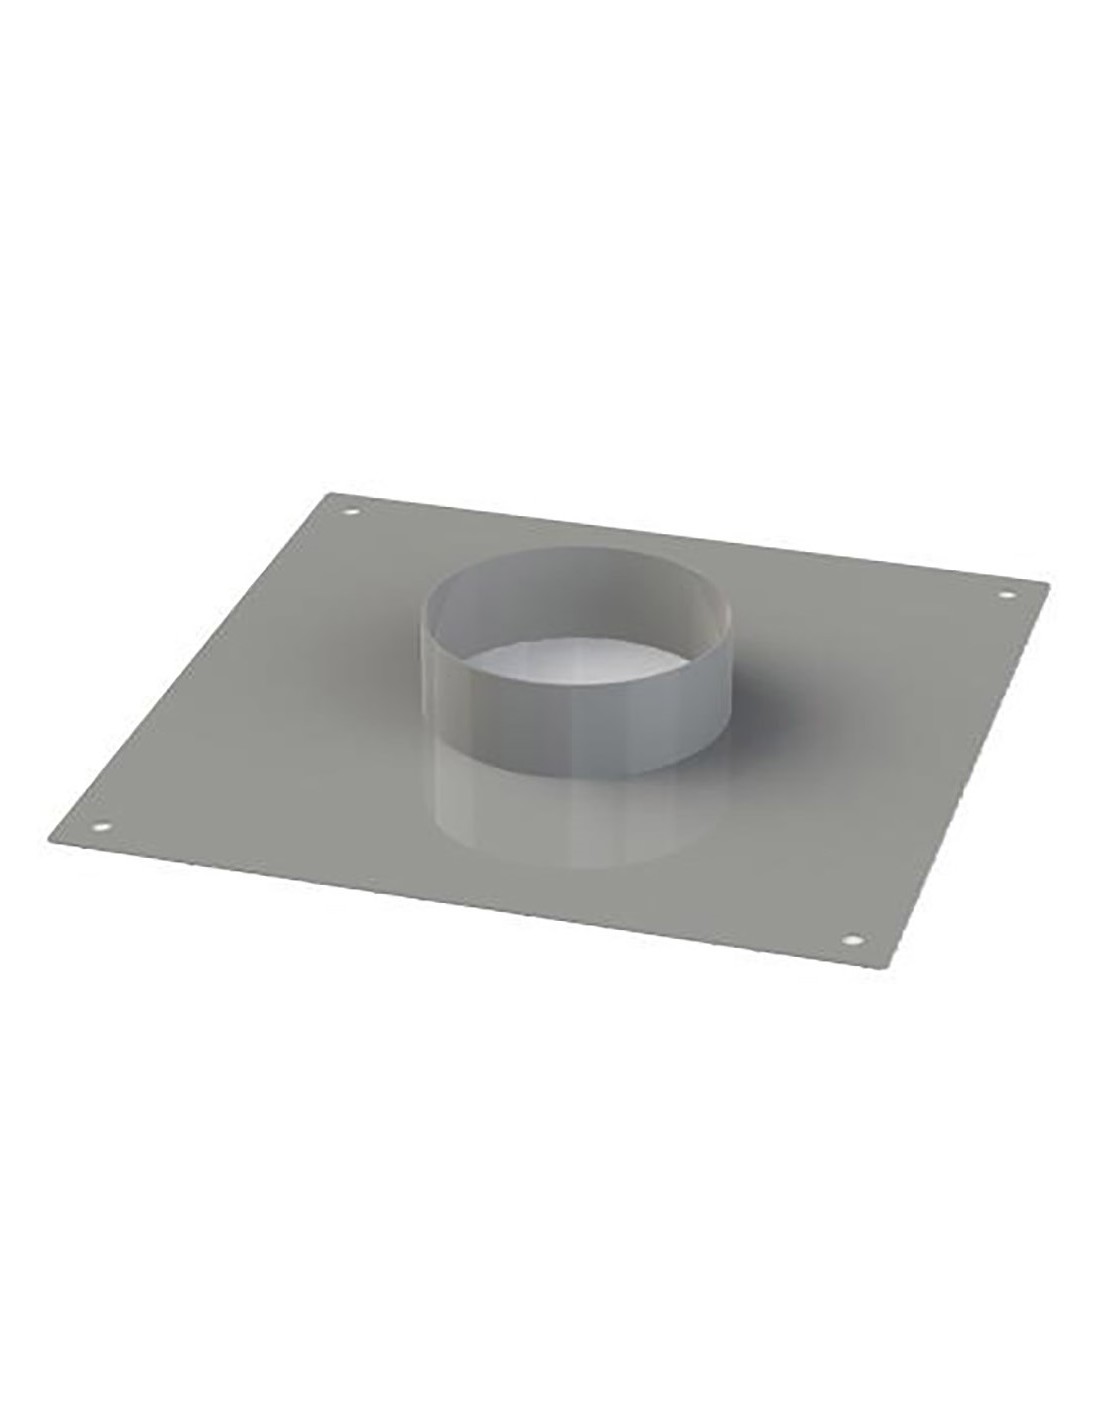 Collar plate for 40 x 60 outlet - Stainless steel - from Ø 32 to 40